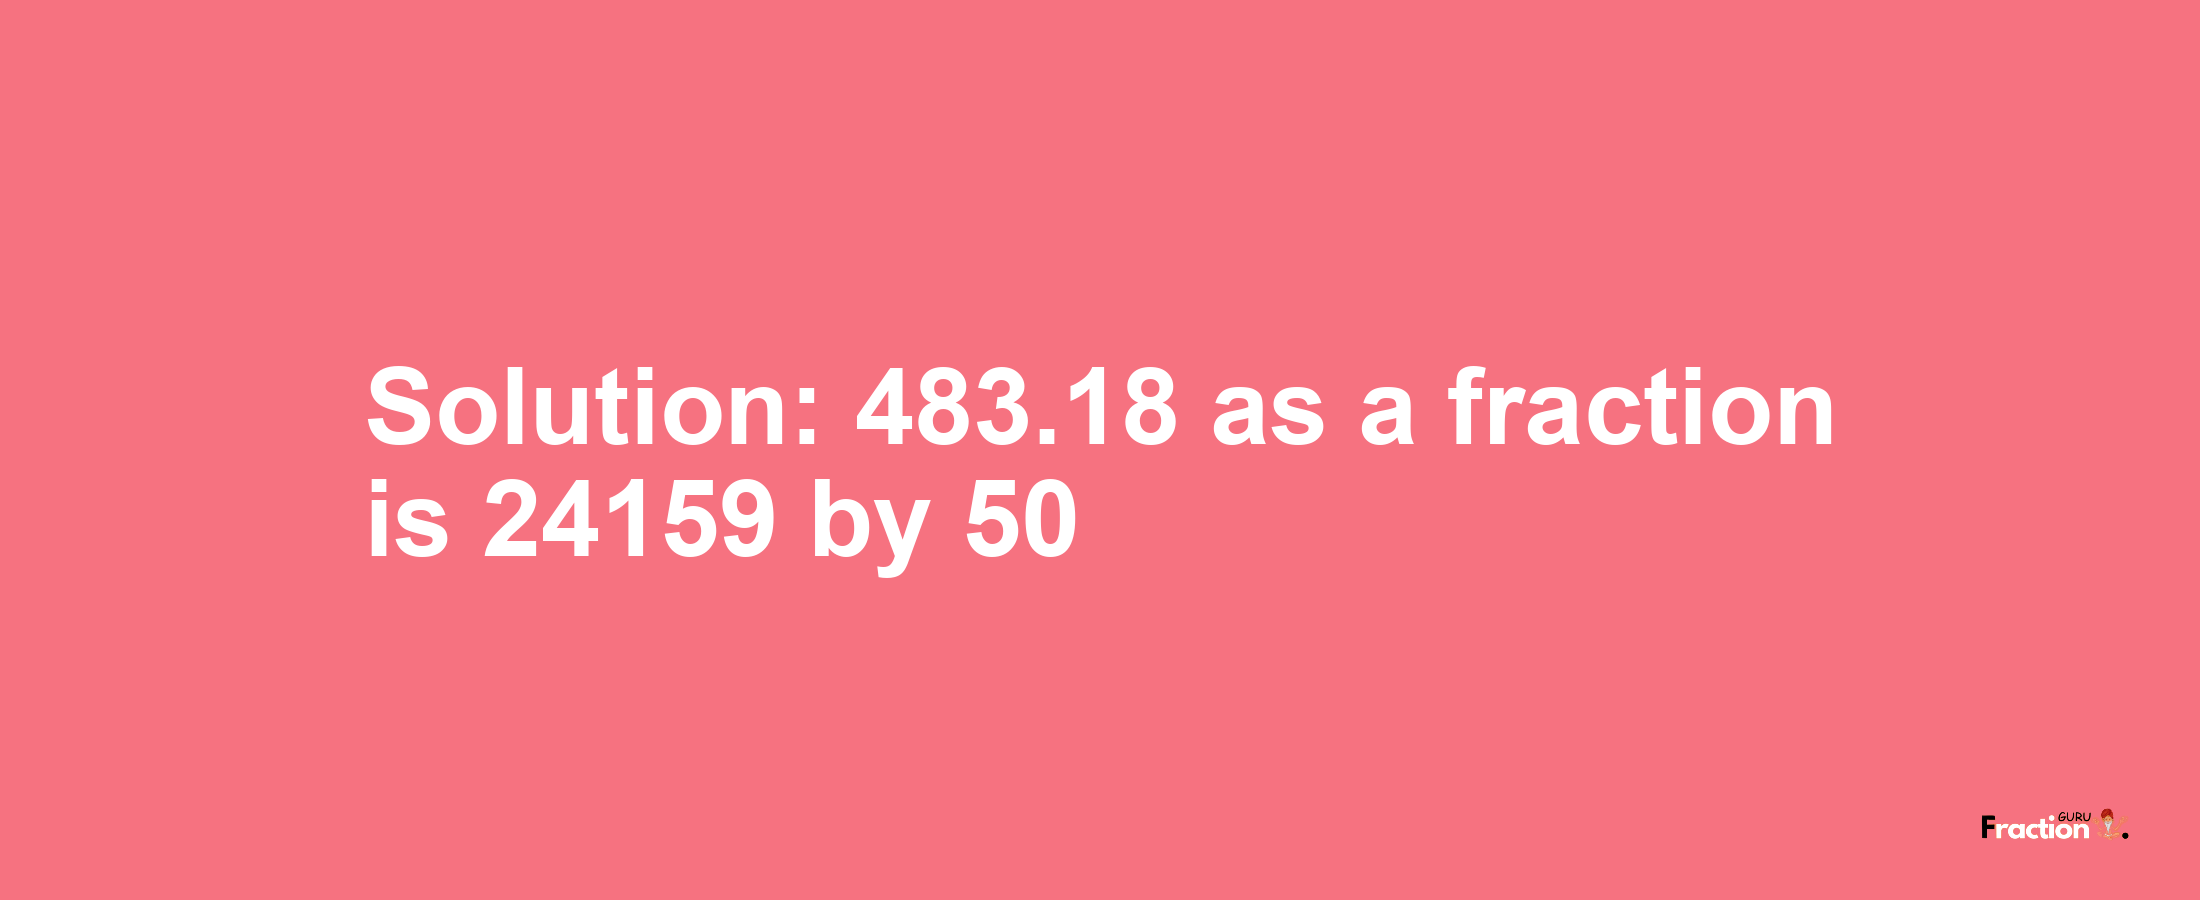 Solution:483.18 as a fraction is 24159/50